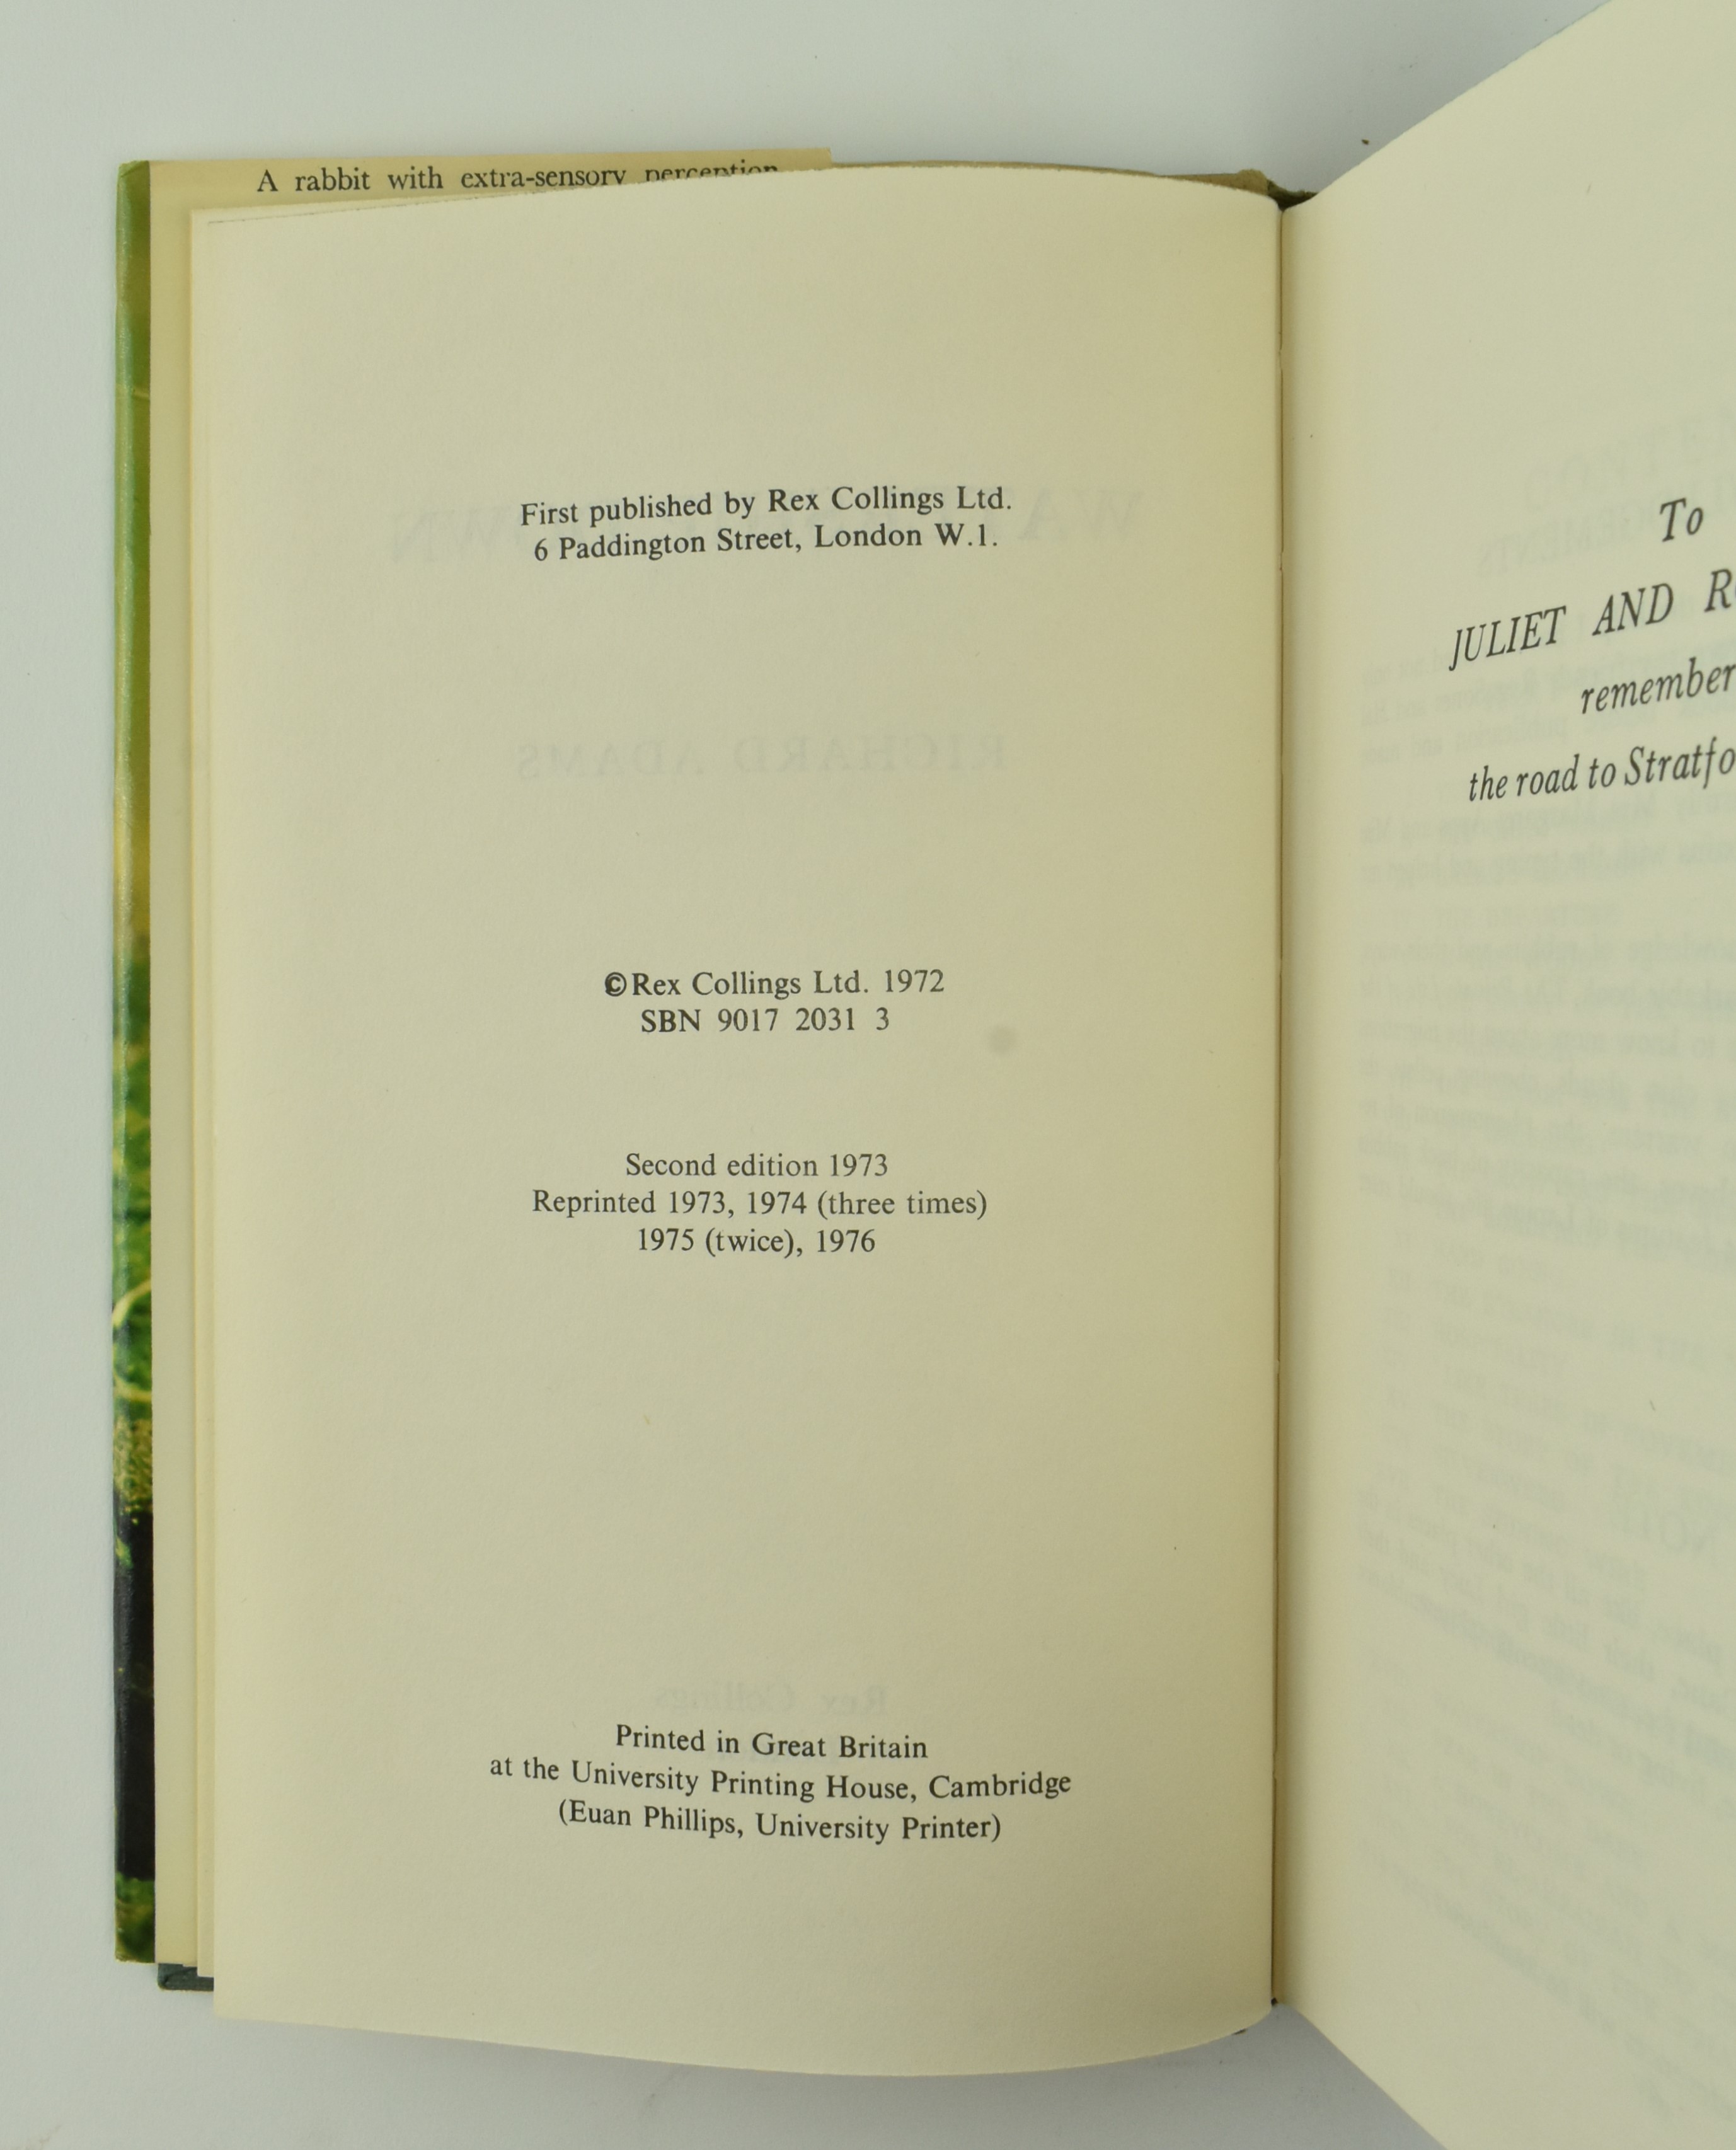 MODERN FIRST EDITIONS. COLLECTION OF FIRST & EARLY EDITIONS - Image 15 of 15